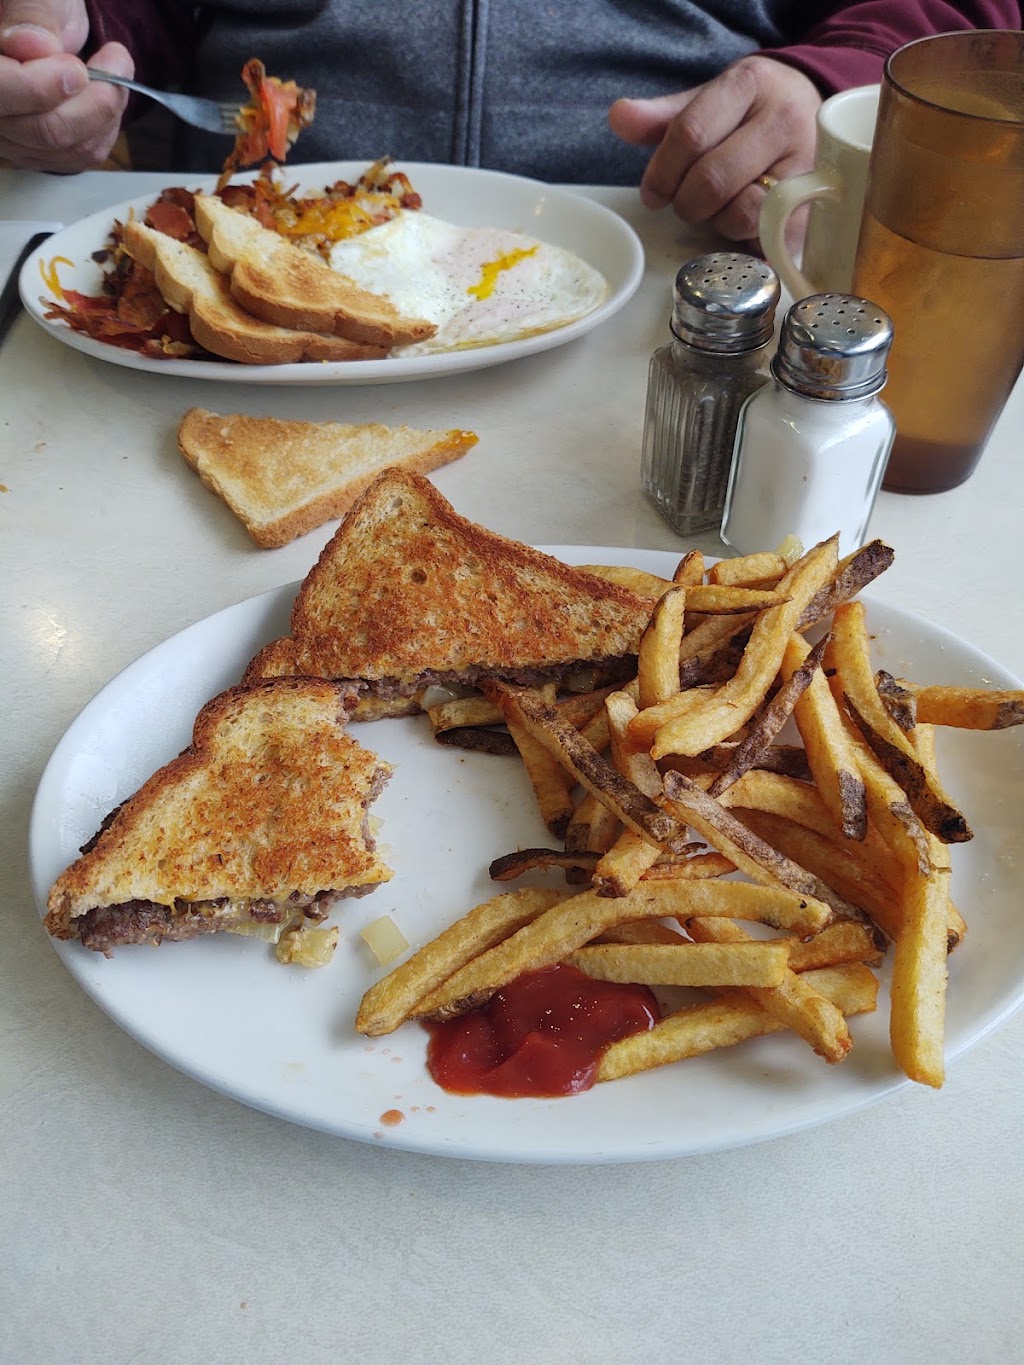 Mickeys Diner By willy | 1950 7th St W, St Paul, MN 55116 | Phone: (651) 698-8387